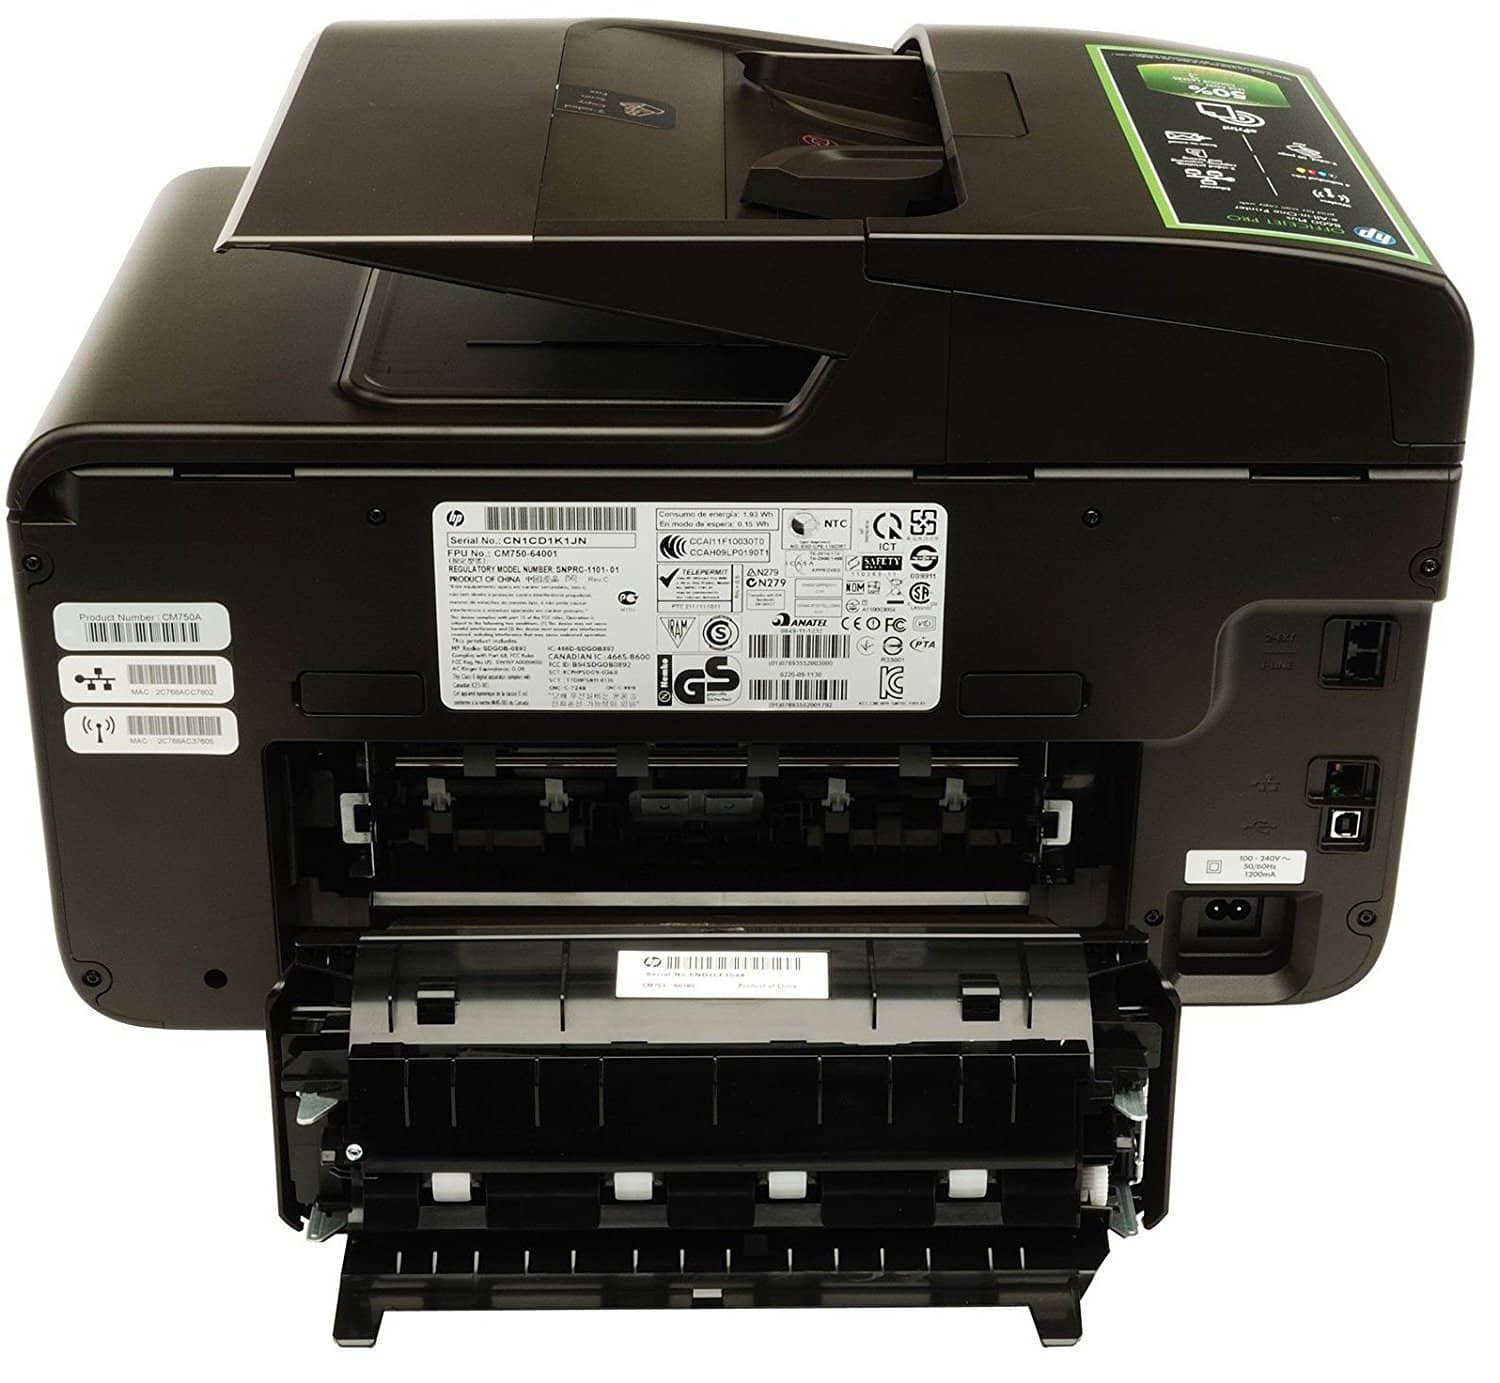 Hp Officejet 8600 Series Driver